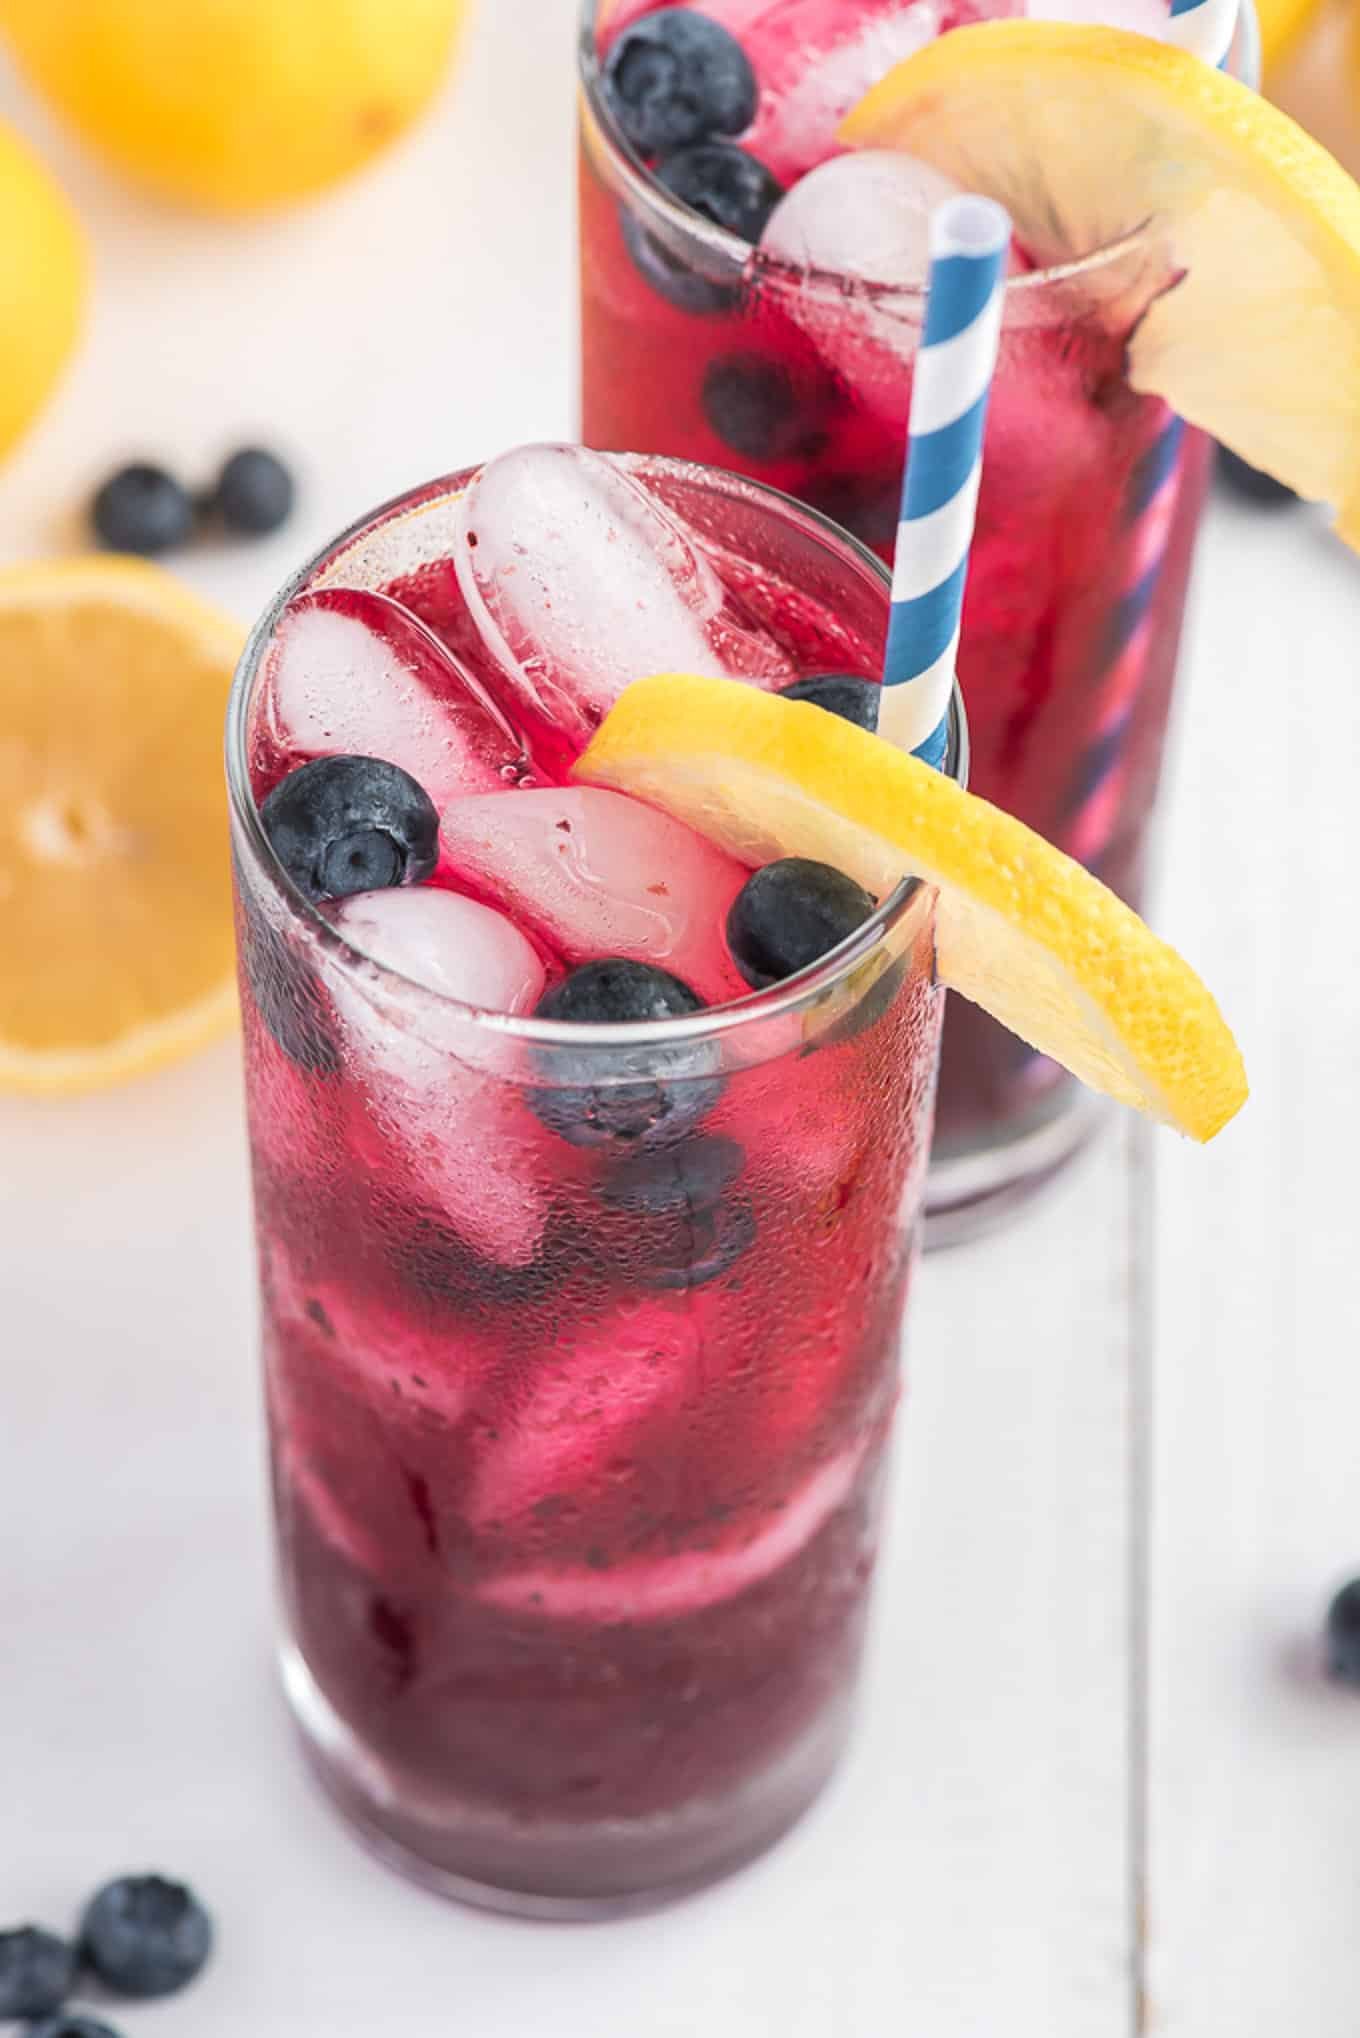 An angled shot of two tall glasses of blueberry lemonade with striped blue straws and lemon wedges.